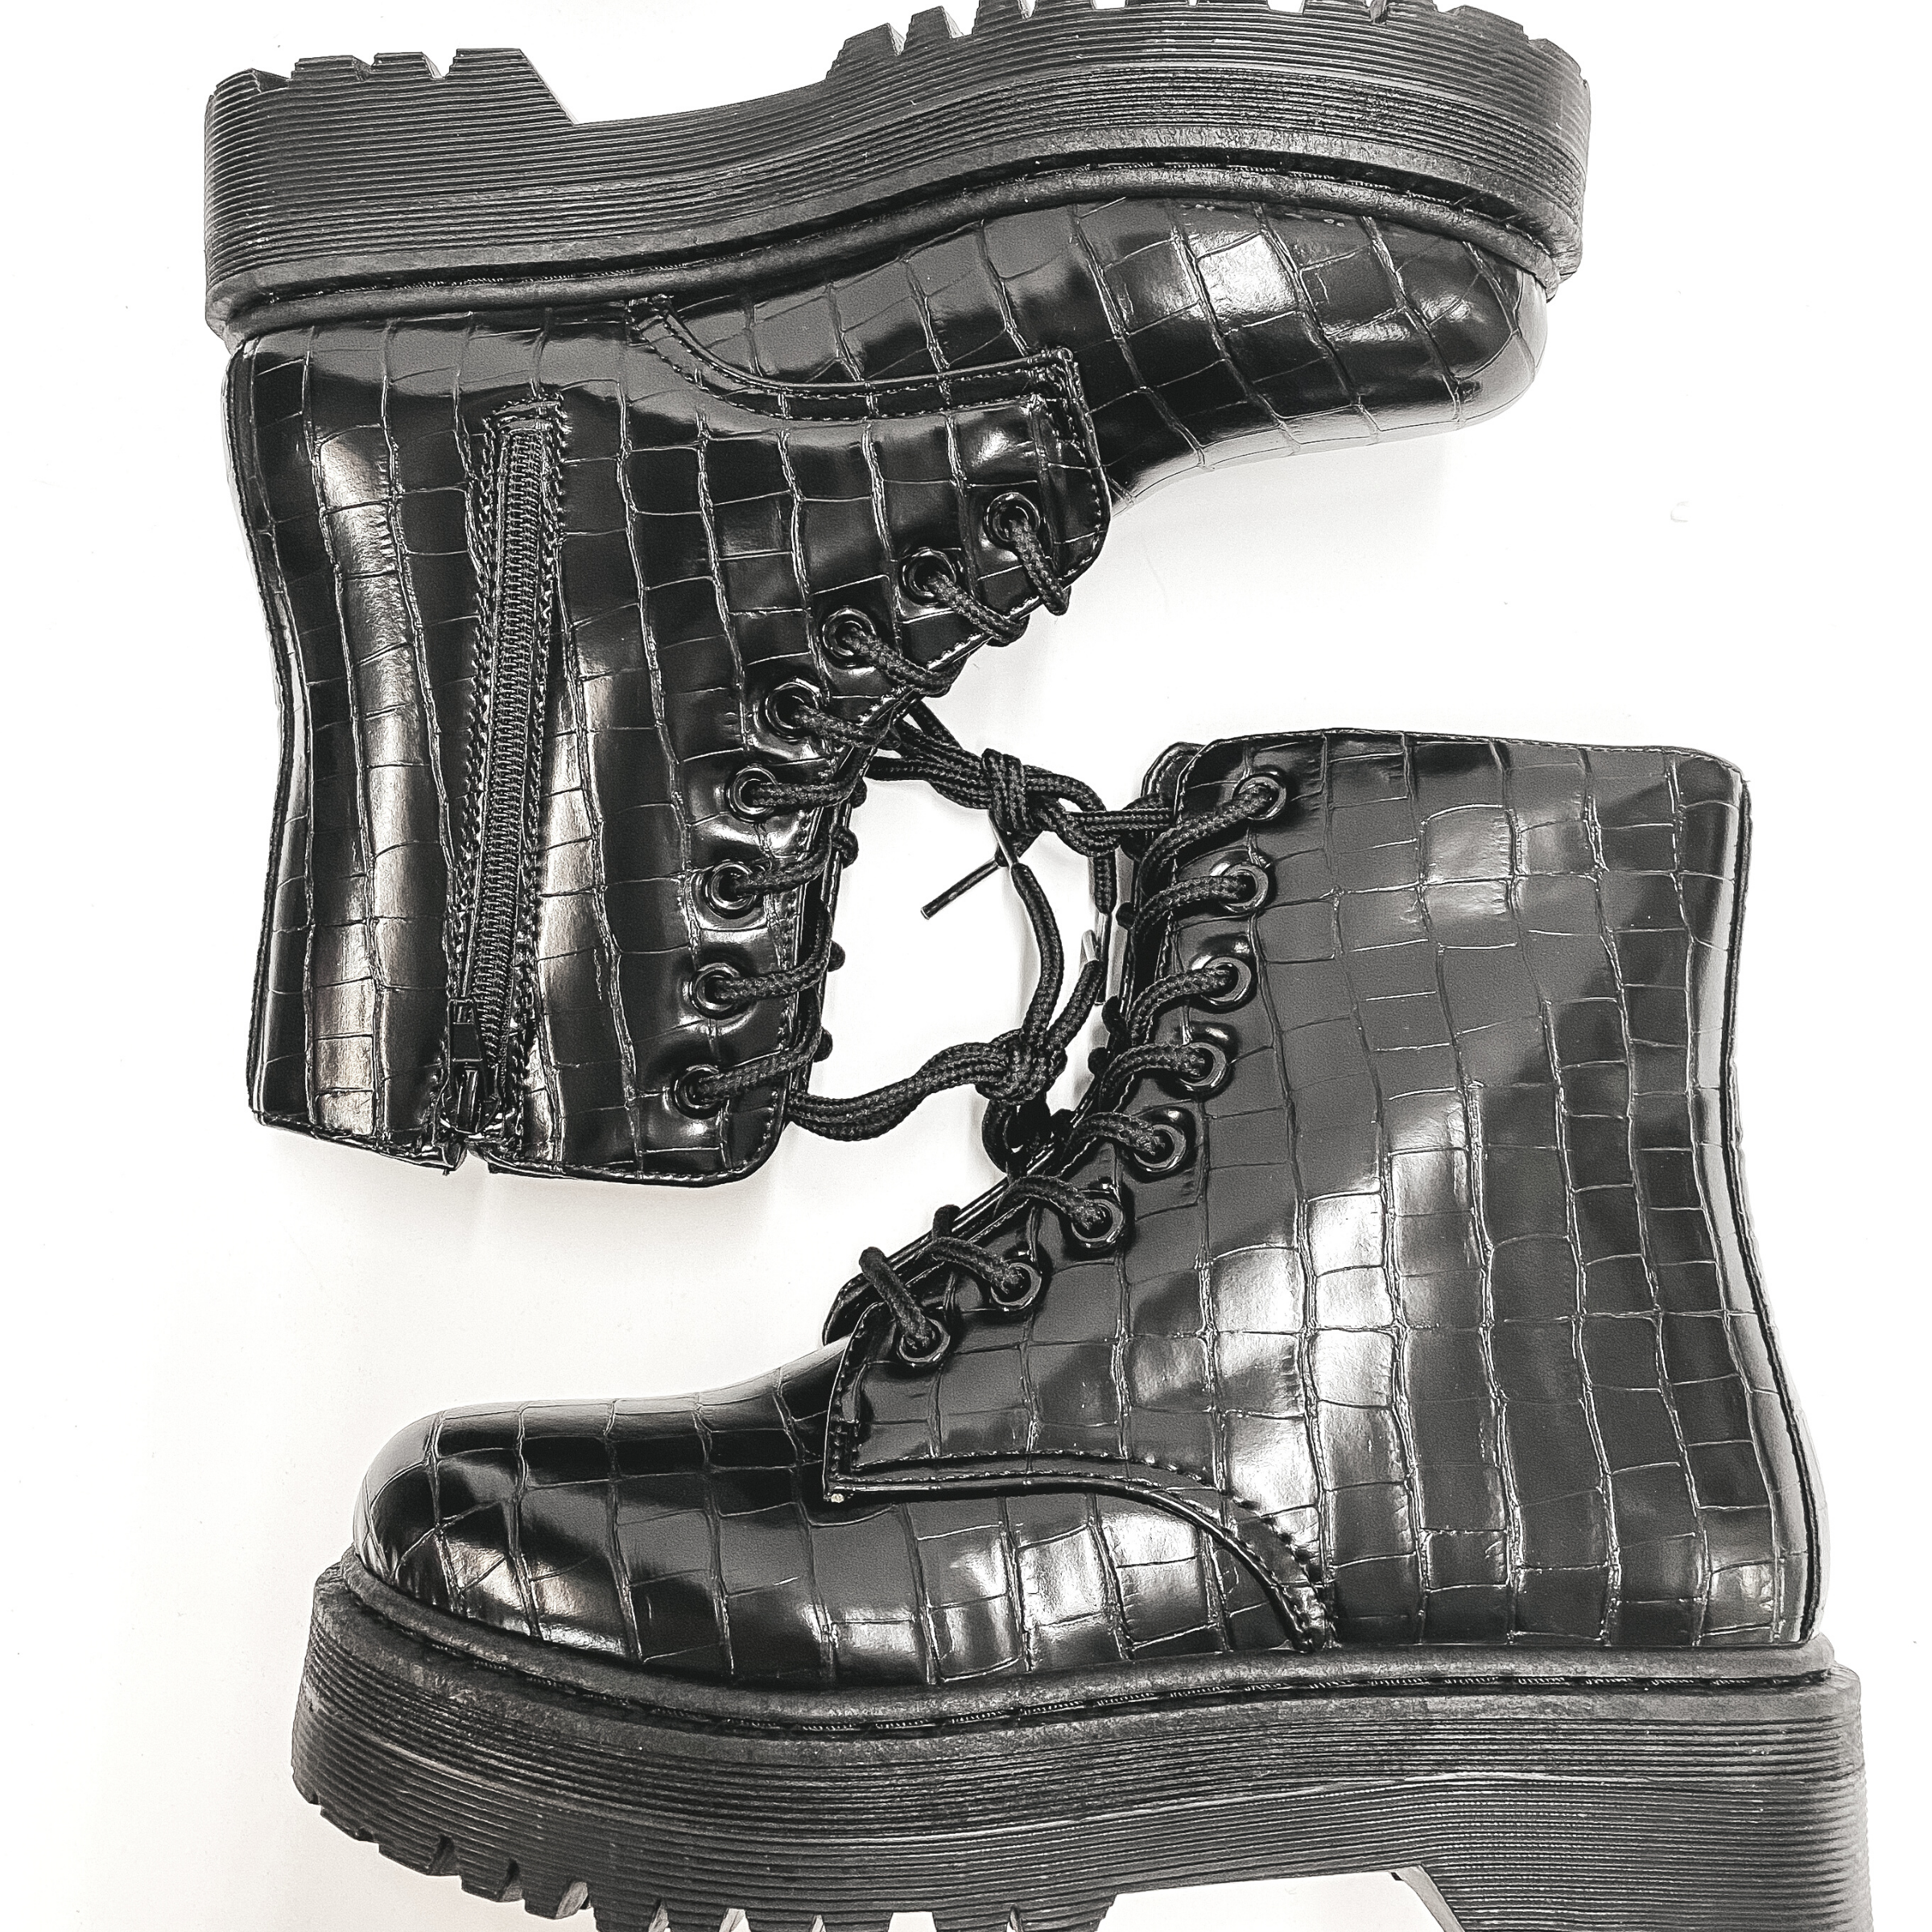 Born to be Wild Combat Boots in Black Croc - Giddy Up Glamour Boutique